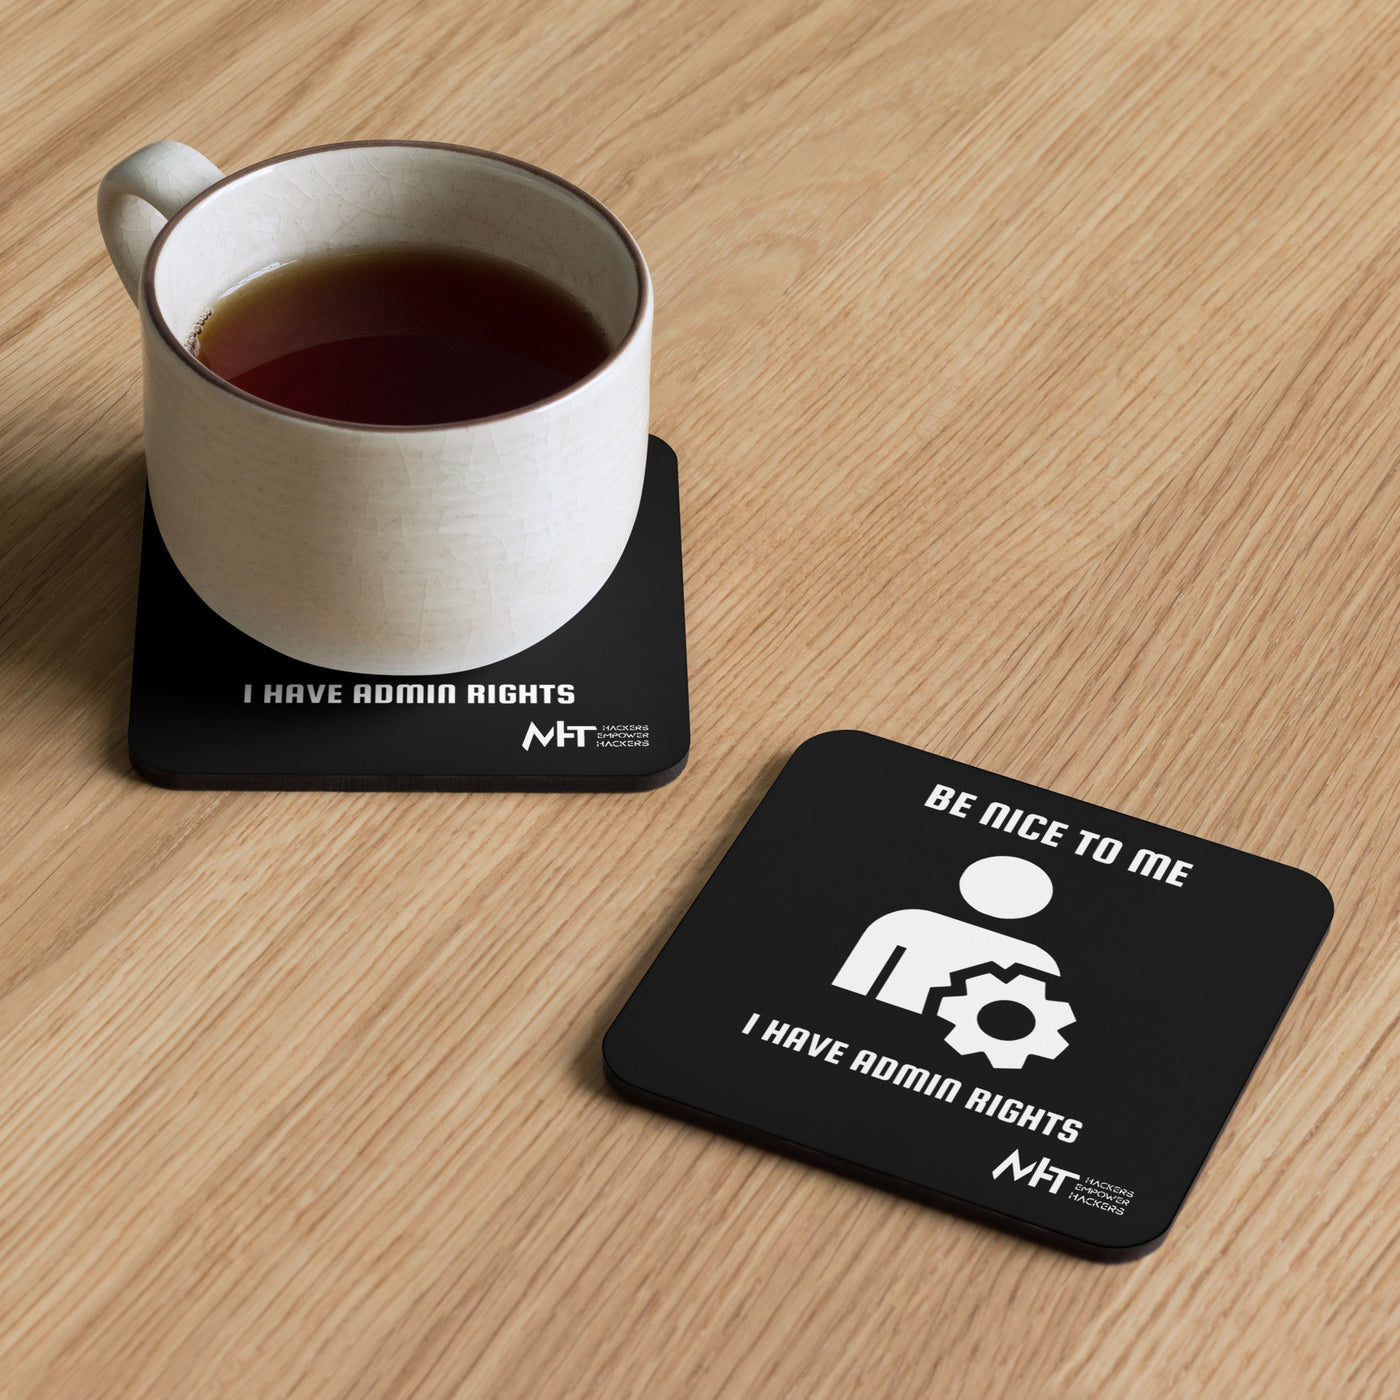 Be nice to me I have admin rights - Cork-back coaster